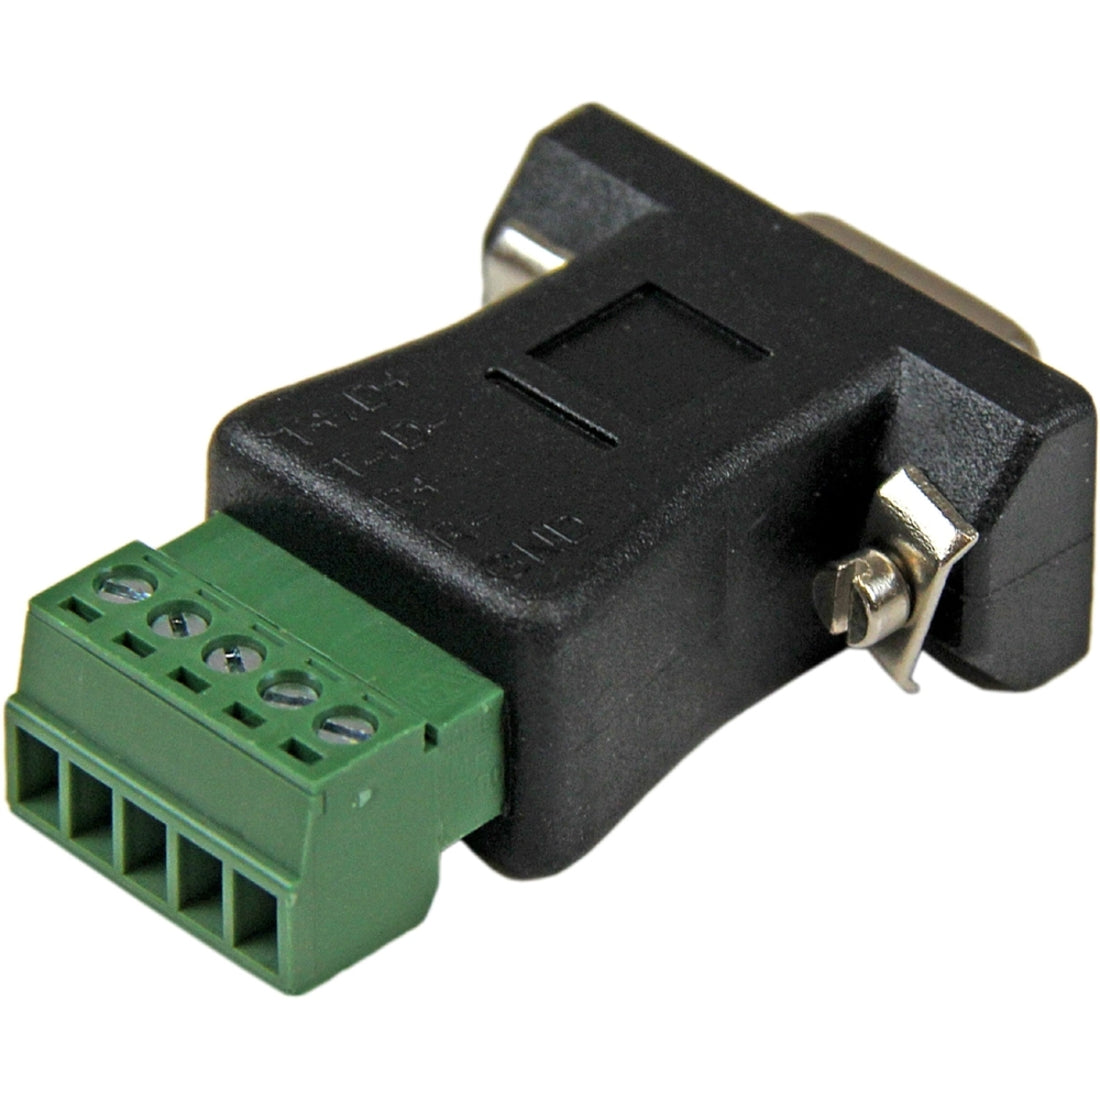 StarTech.com DB92422 RS422 RS485 Serial DB-9 to Terminal Block Adapter, Data Transfer Adapter